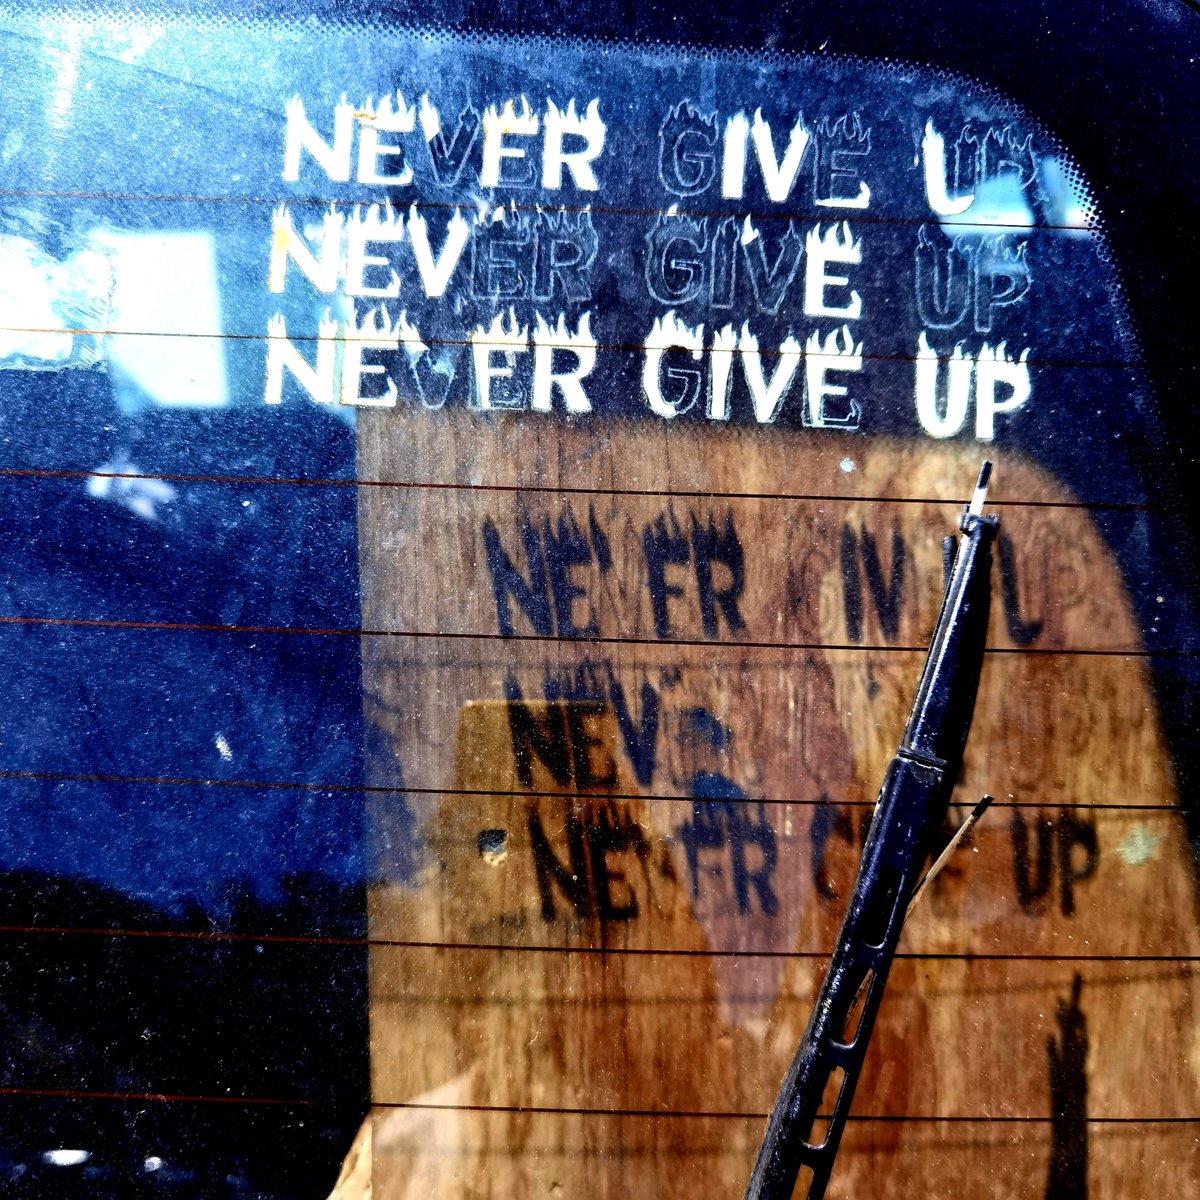 Saw this the other day on a car back window... Nice shadow.. #foundart #NFTCommumity
#CryptoNews